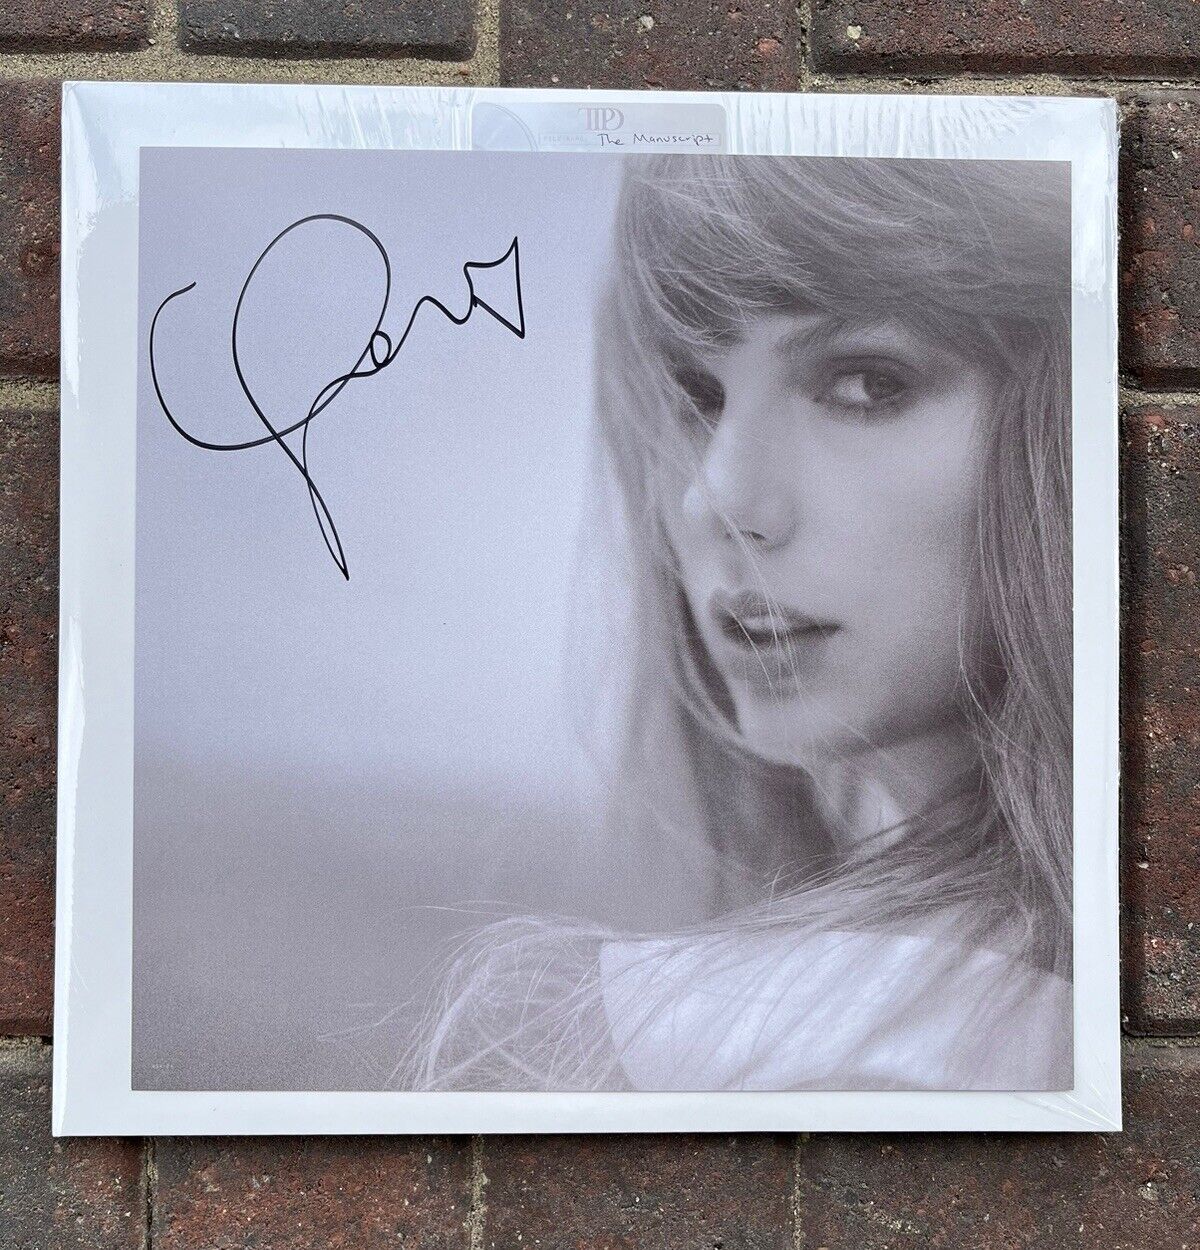 Taylor Swift Signed w/ Heart The Tortured Poets Department Vinyl The Manuscript